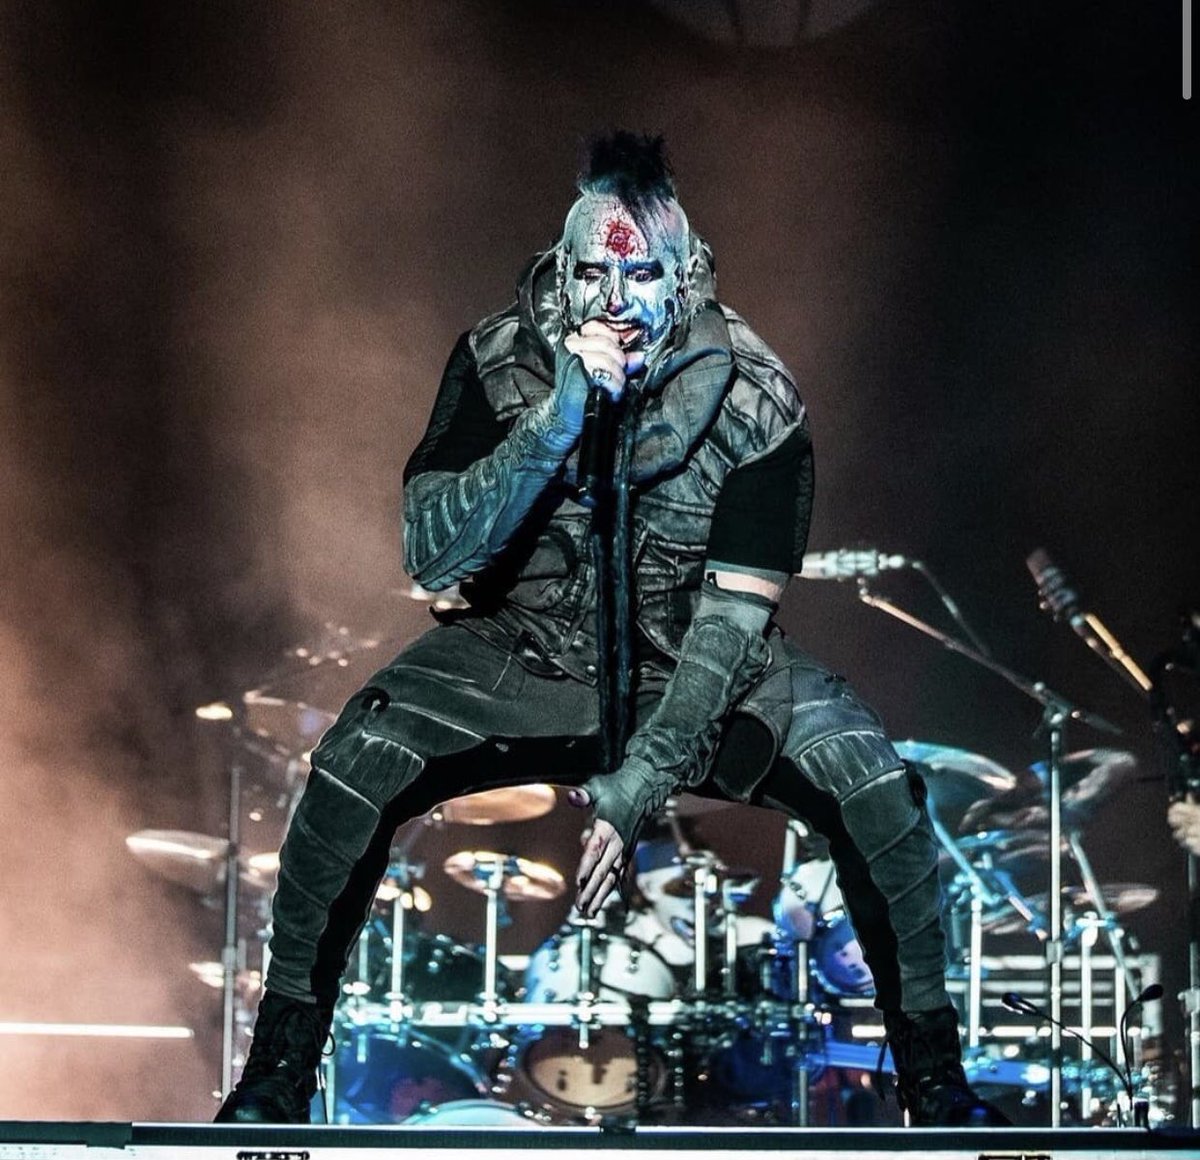 MUDVAYNE Returns At Ohio’s Inkcarceration Festival: Setlist: Mudvayne setlist, Inkcarceration 2021: Not Falling -1 Death Blooms Internal Primates Forever Silenced A New Game Prod A Cinderella Story Dull Boy World So Cold Determined Nothing to Gein Happy? Dig #Mudvayne